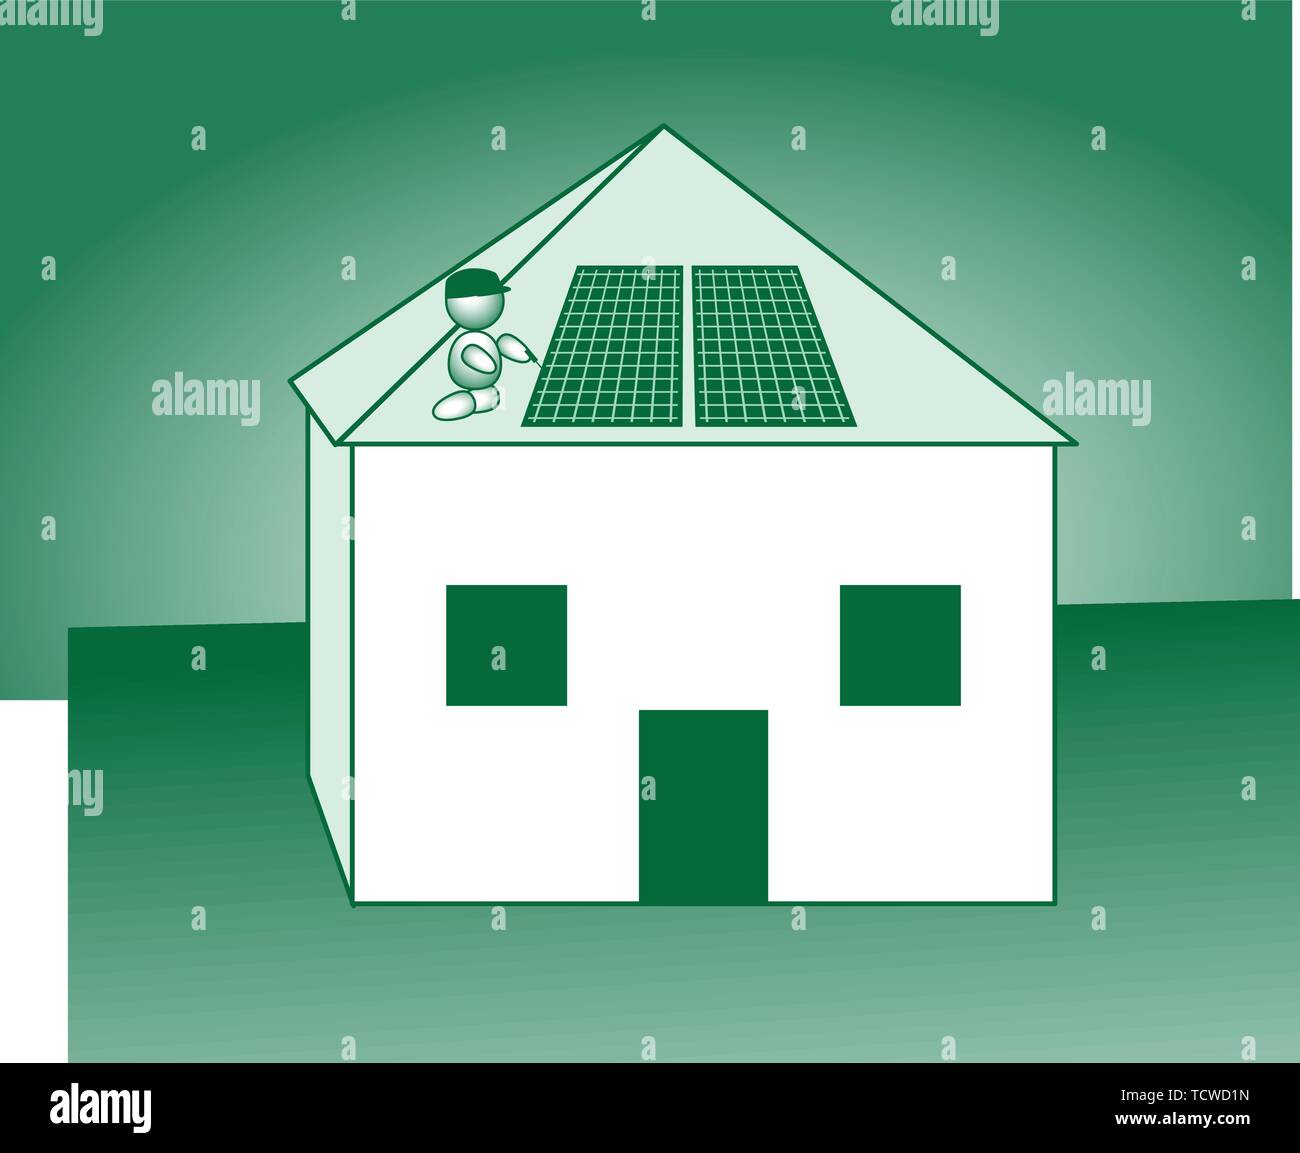 photovoltaic system house zero energy roof renovation Stock Vector